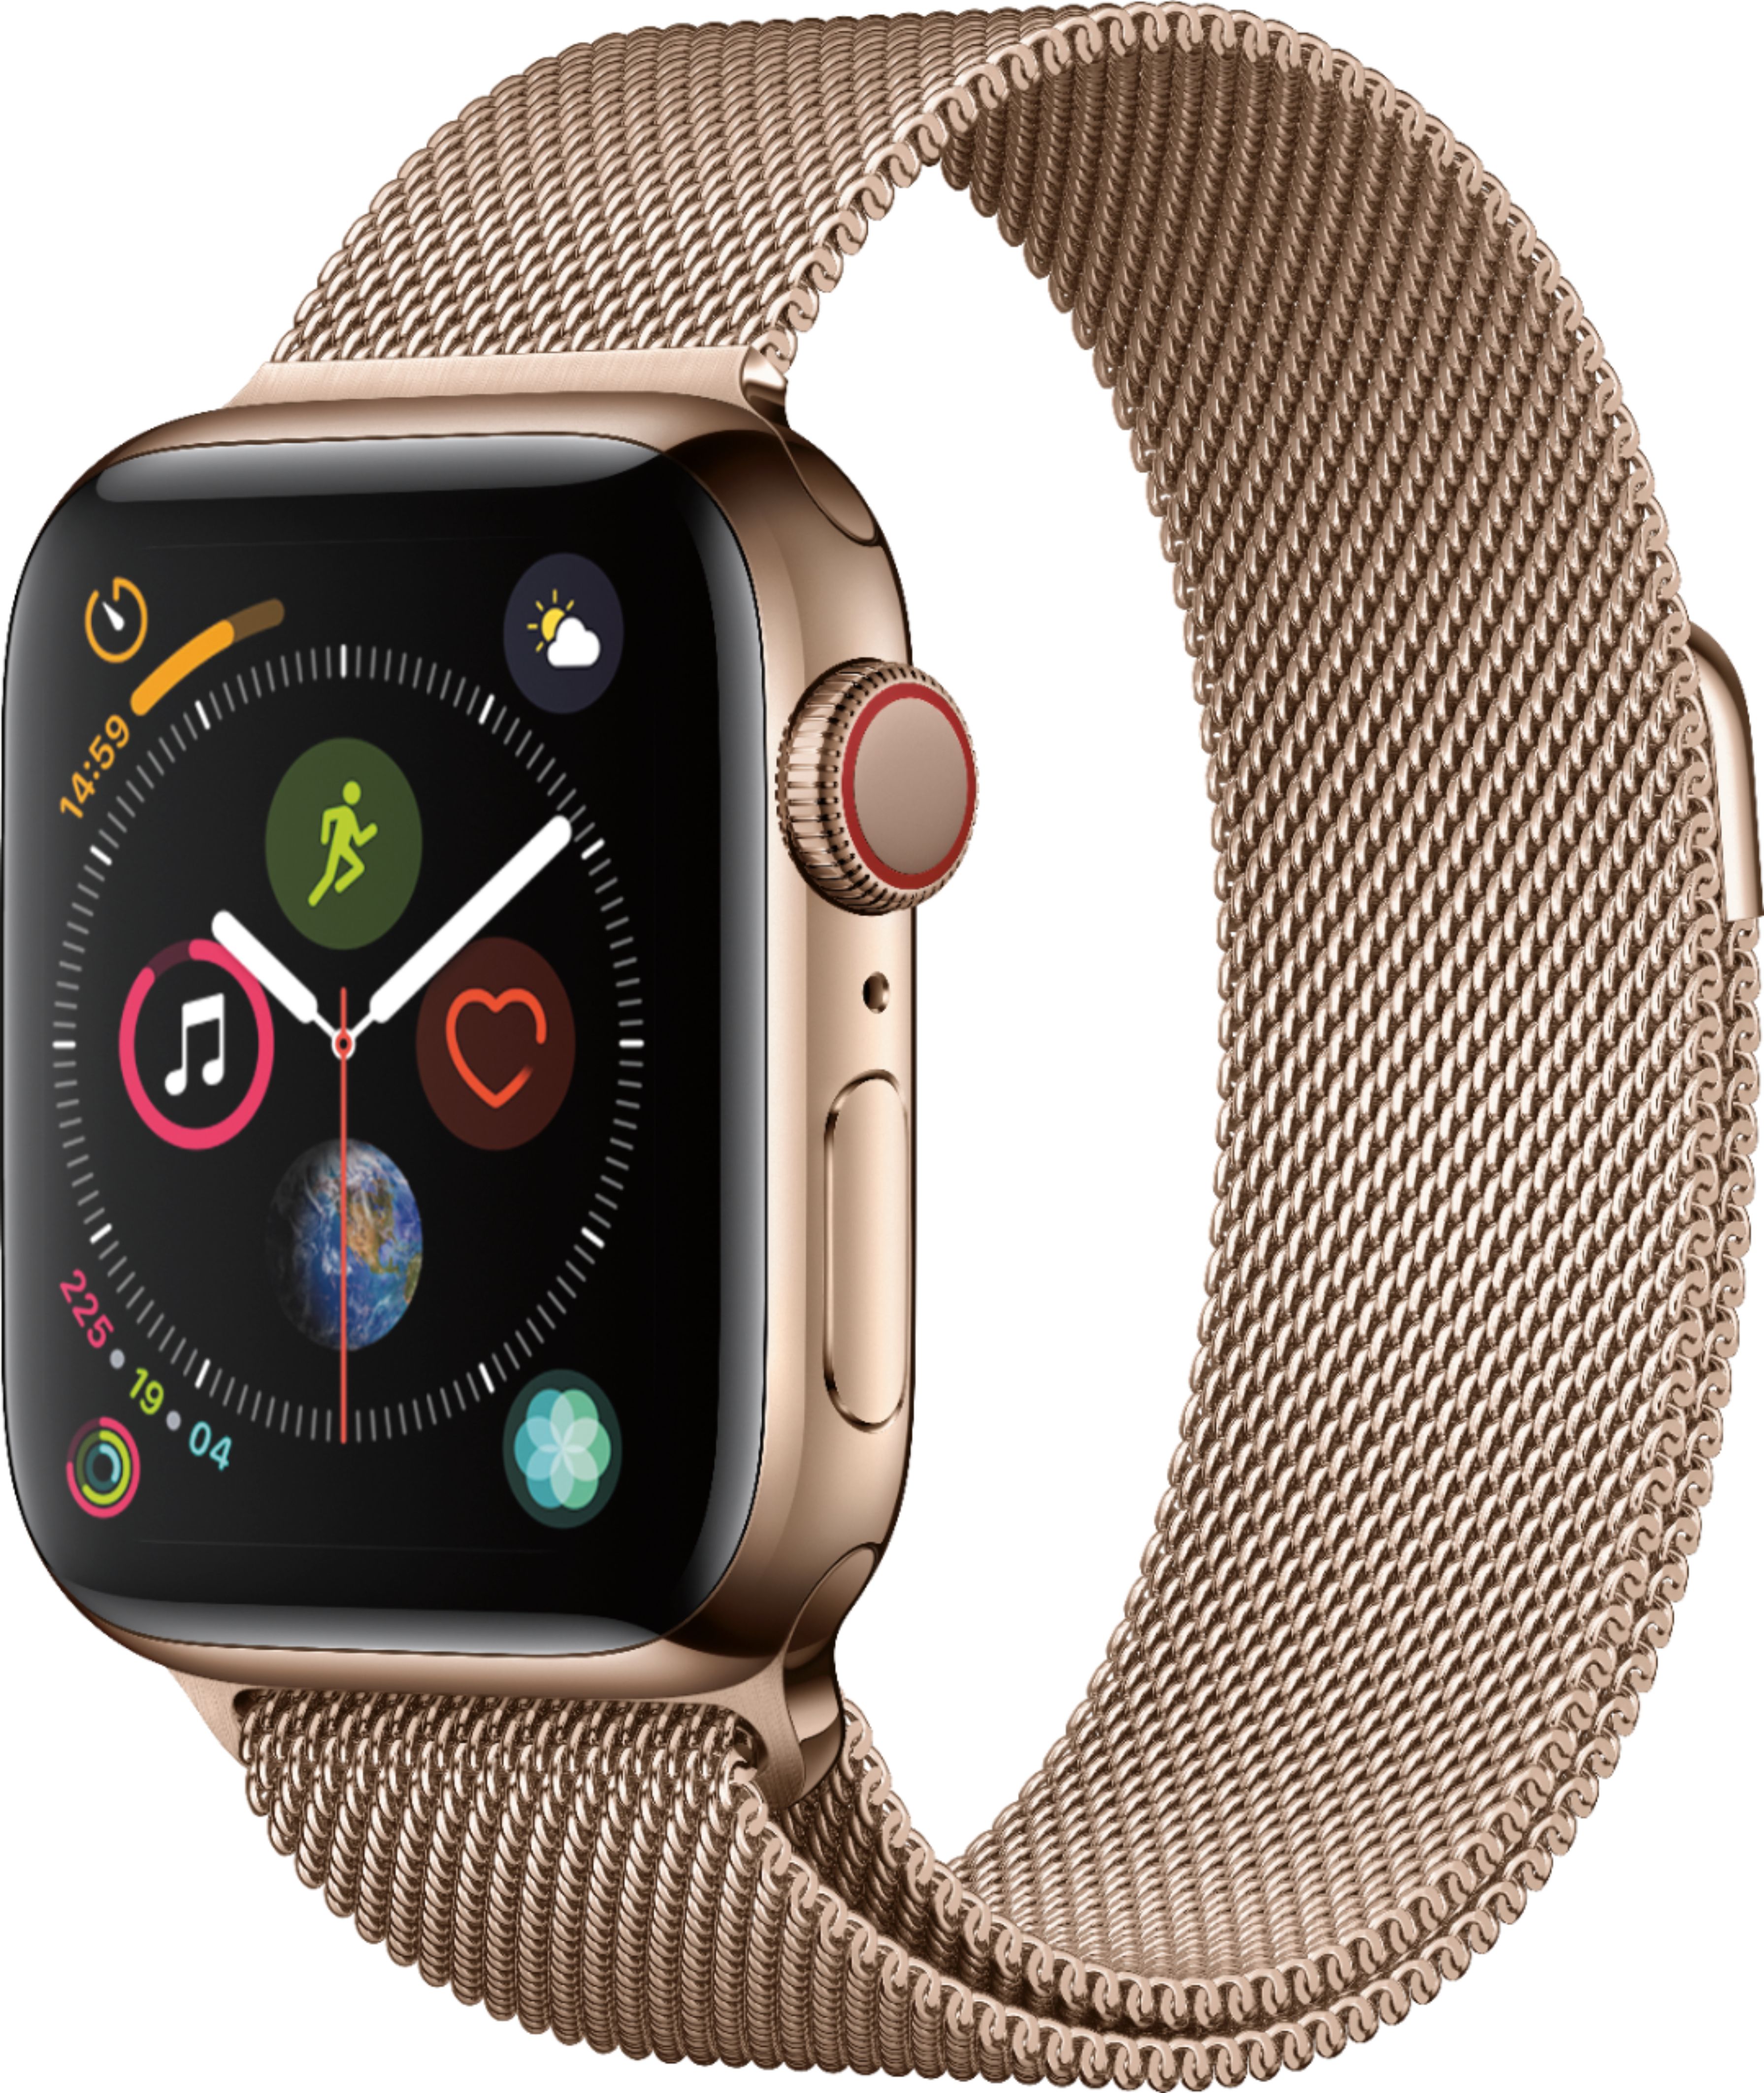 Geek Squad Certified Refurbished Apple Watch Series 4 (GPS + Cellular) 40mm Stainless Steel Case with Milanese Loop - Gold Stainless Steel